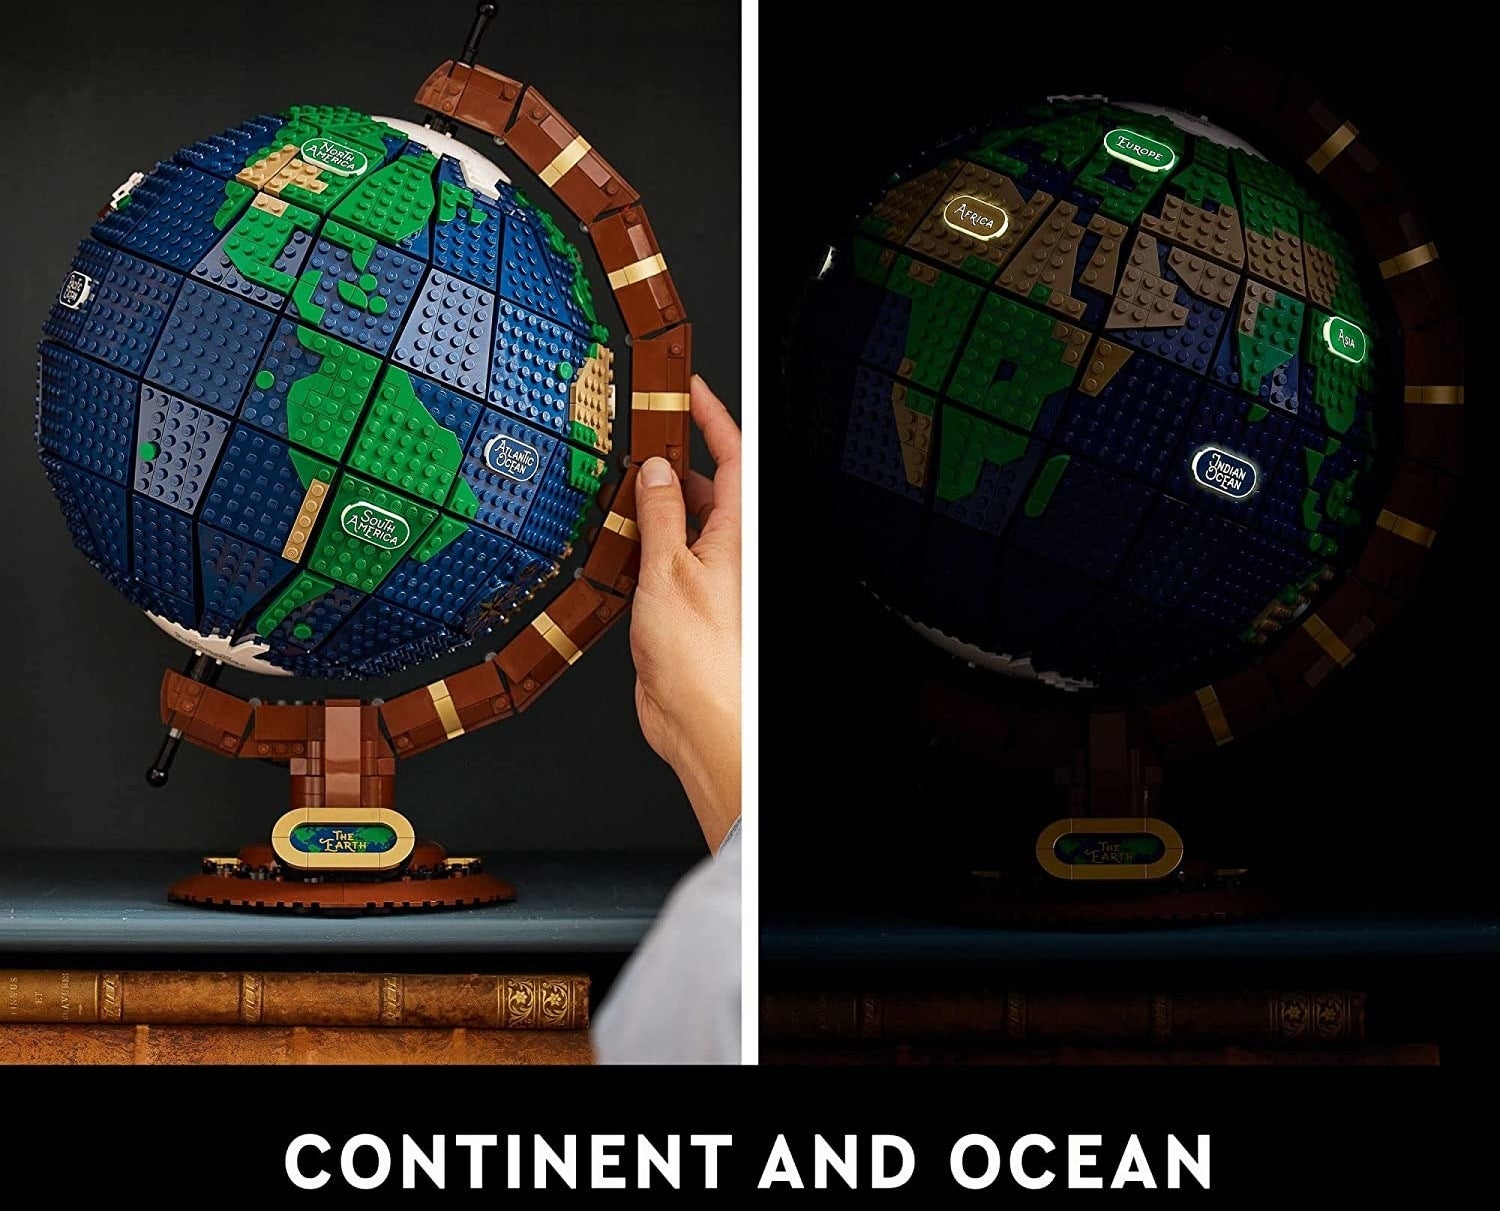 a split image showing the globe in the light and in the dark